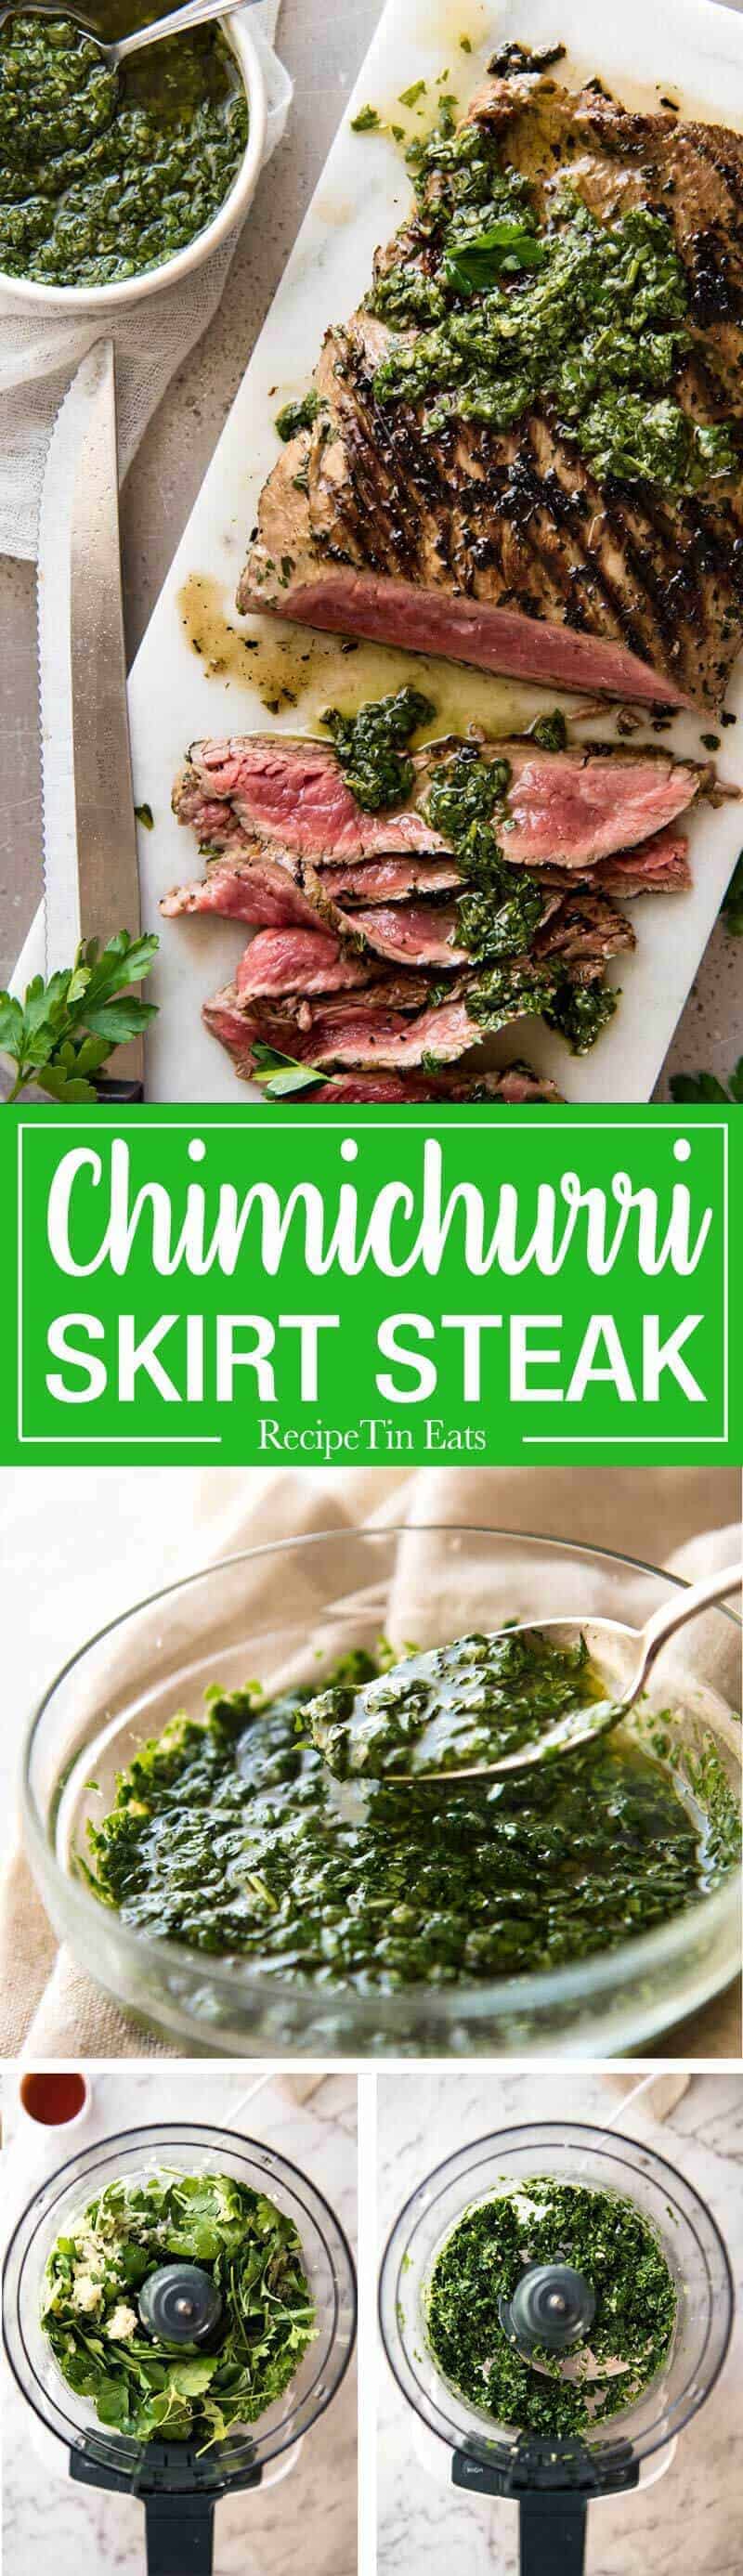 Chimichurri Steak with Chimichurri Sauce - Parsley, oregano, red wine vinegar, olive oil and garlic is all you need to make this famous Argentinian sauce! recipetineats.com